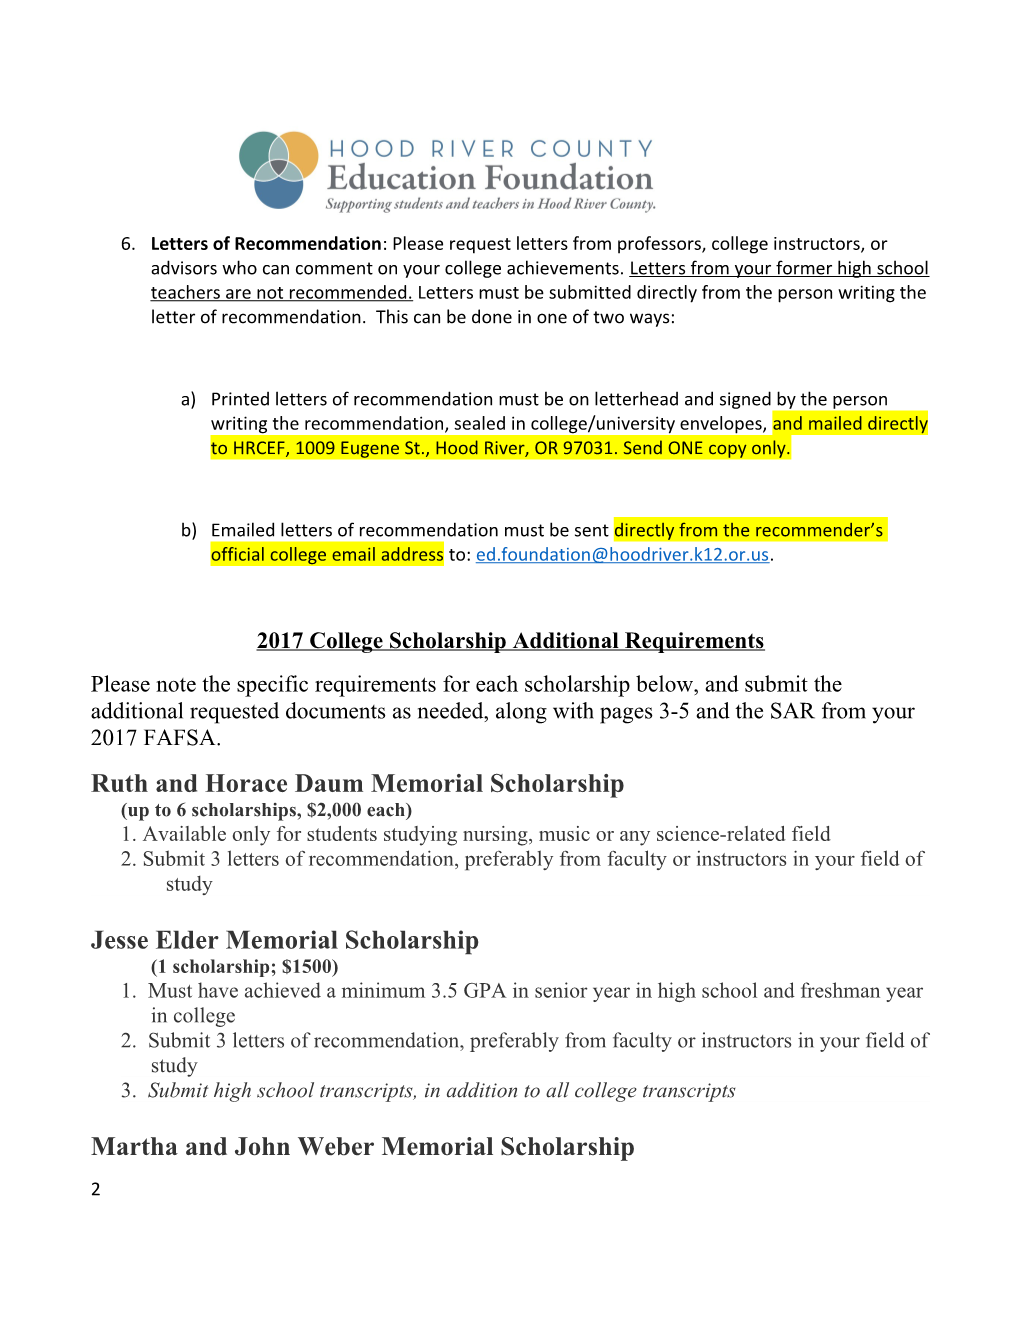 HRCEF College Scholarship Application Instructions 2017